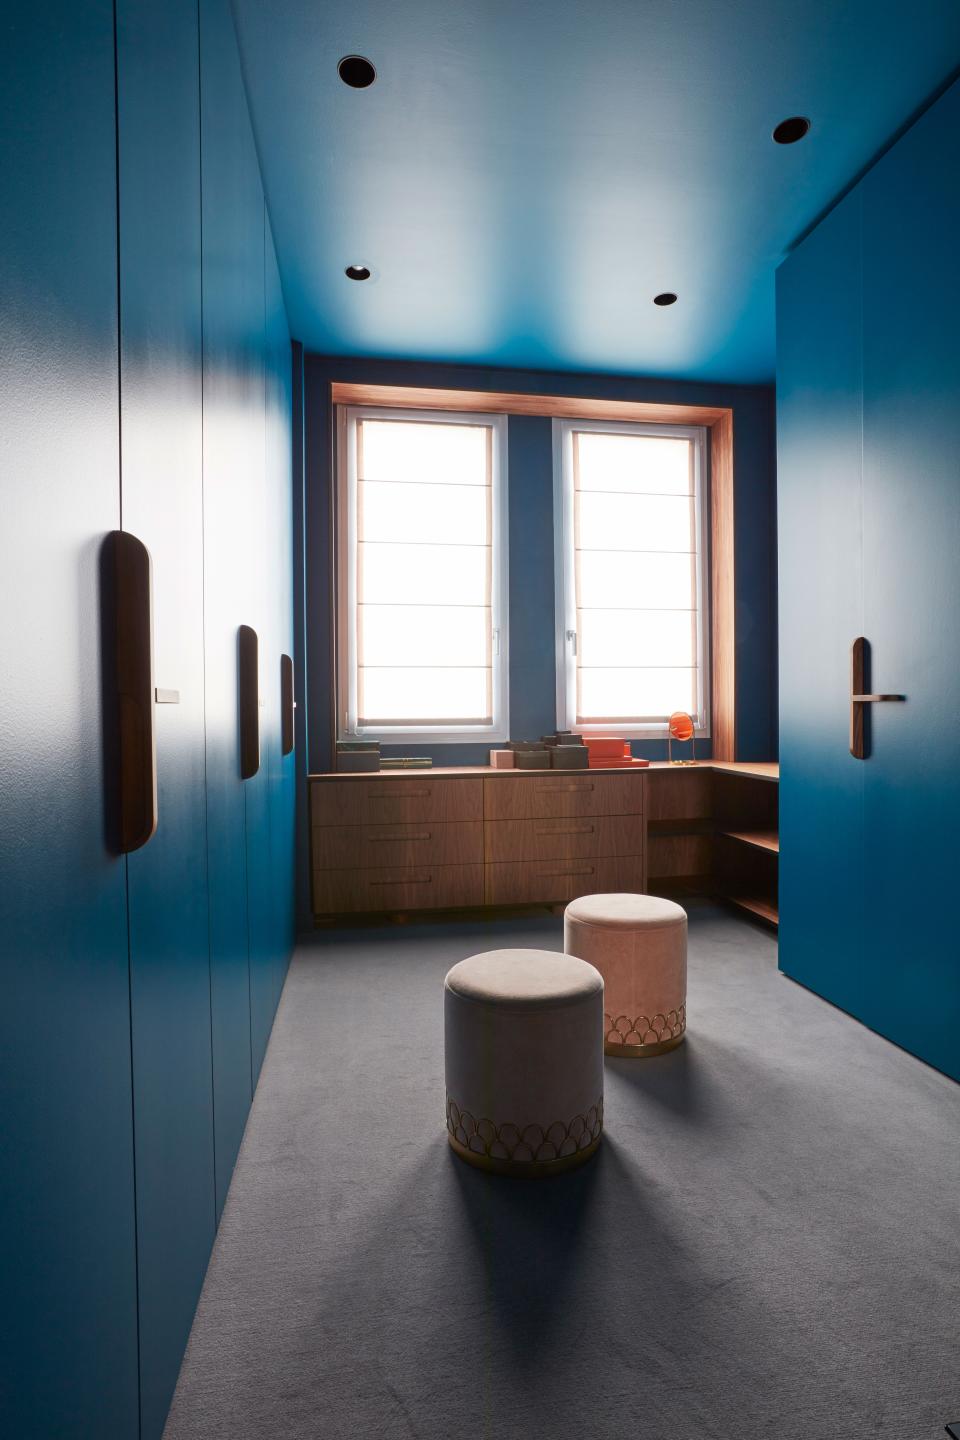 In the wardrobe, the rich blue color covers the doors, ceilings, and walls.